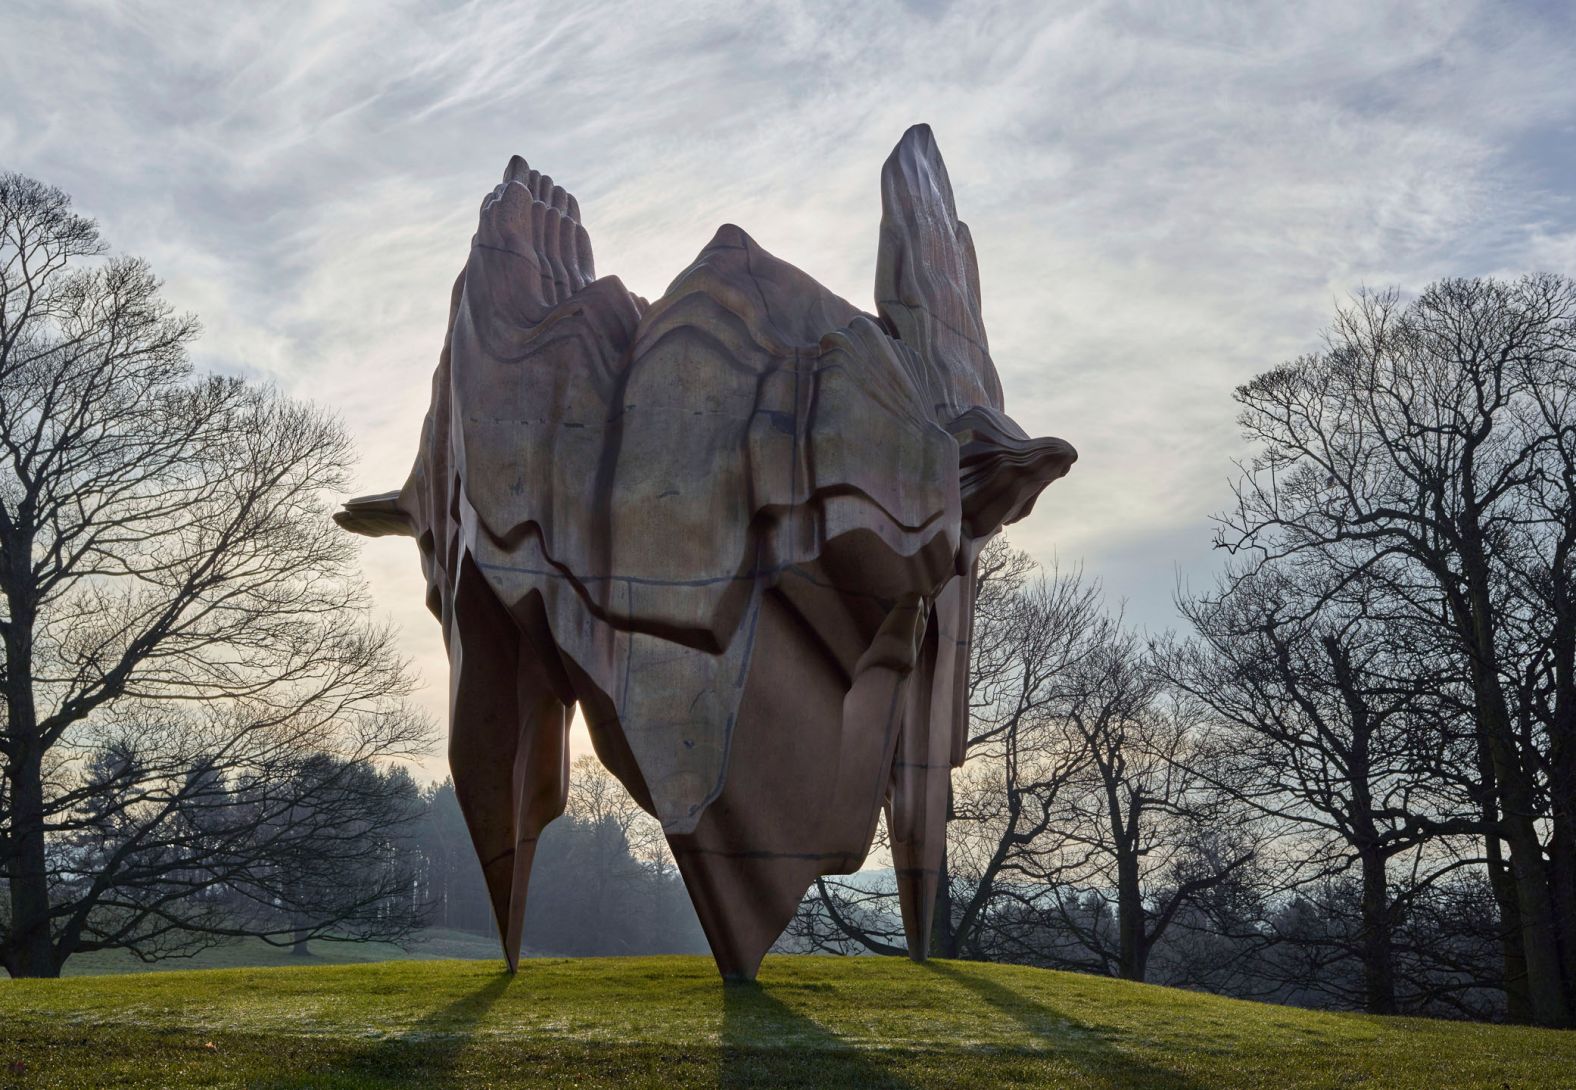 Tony Cragg: A Rare Category of Objects at Yorkshire Sculpture Park